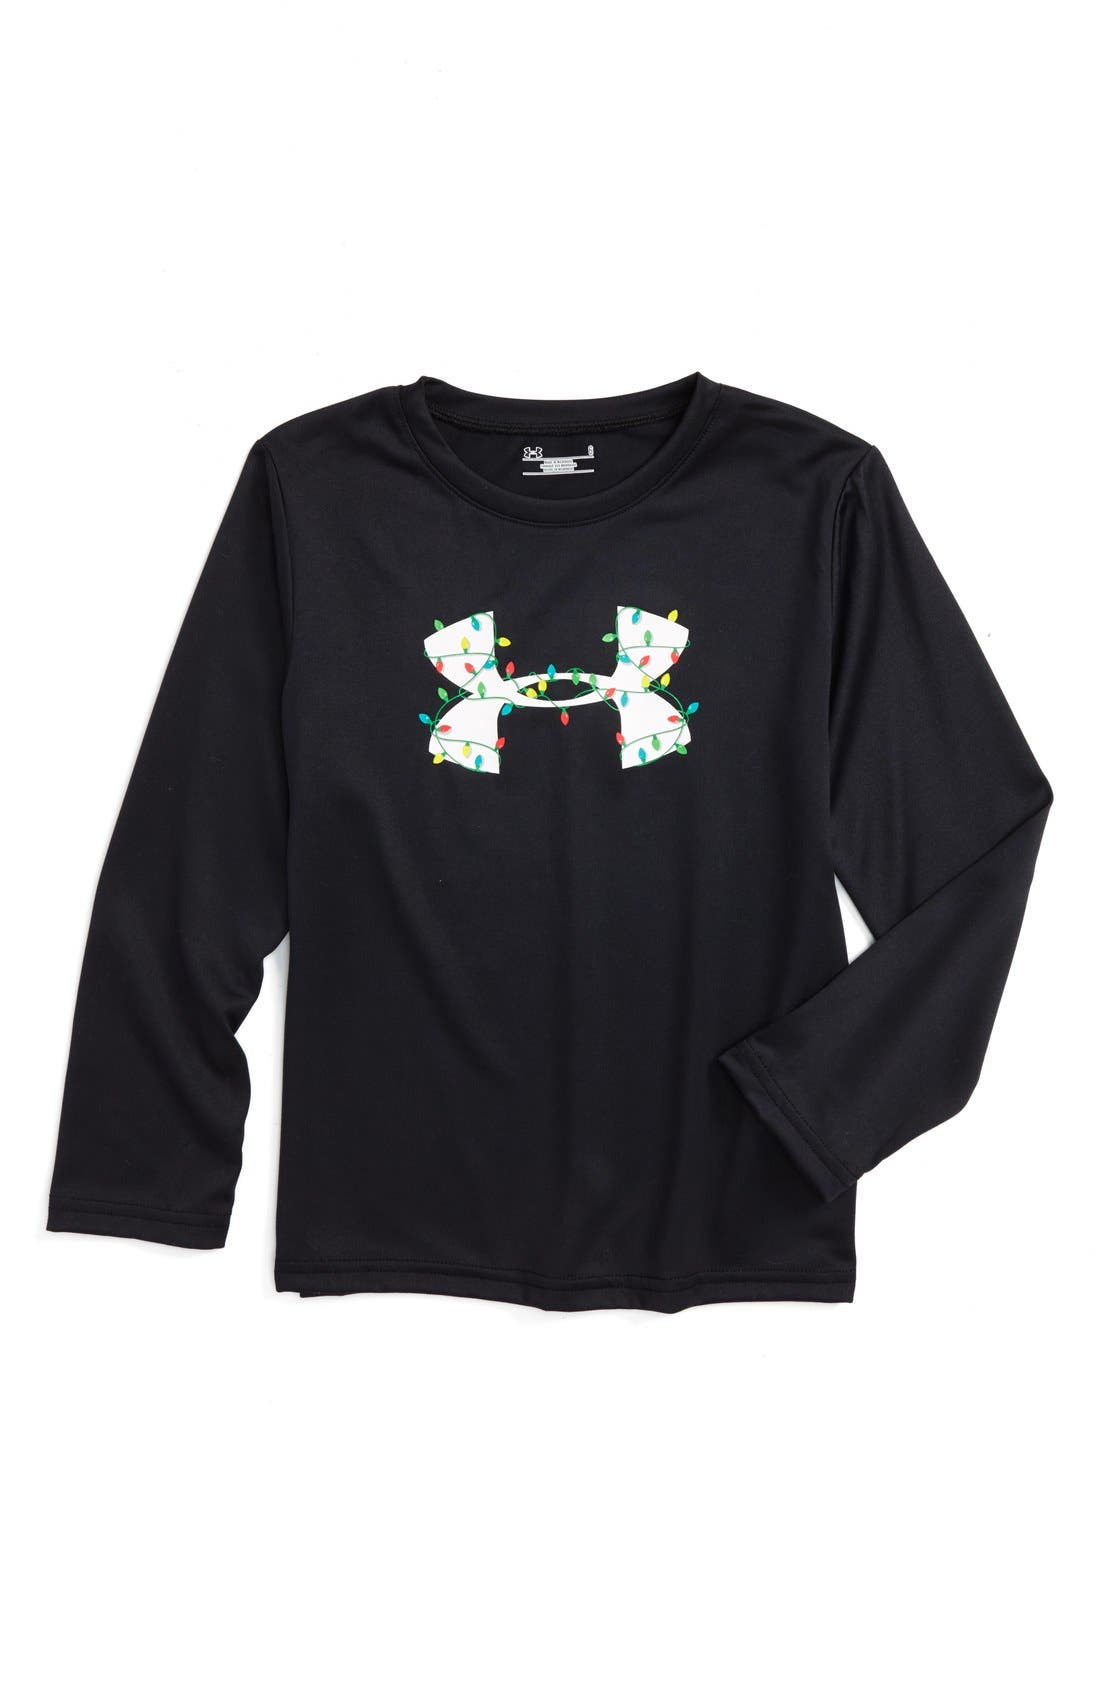 under armour holiday shirt